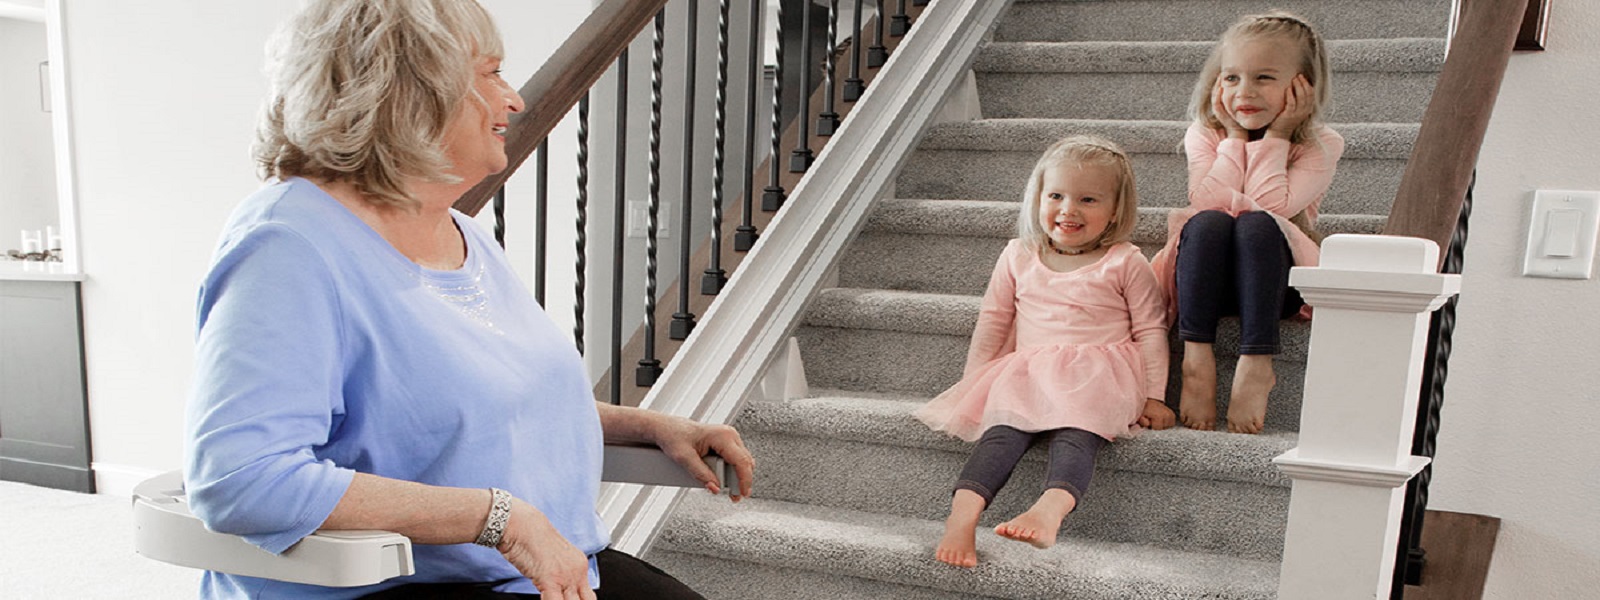 stairlifts in mass, nh and maine by Bruno